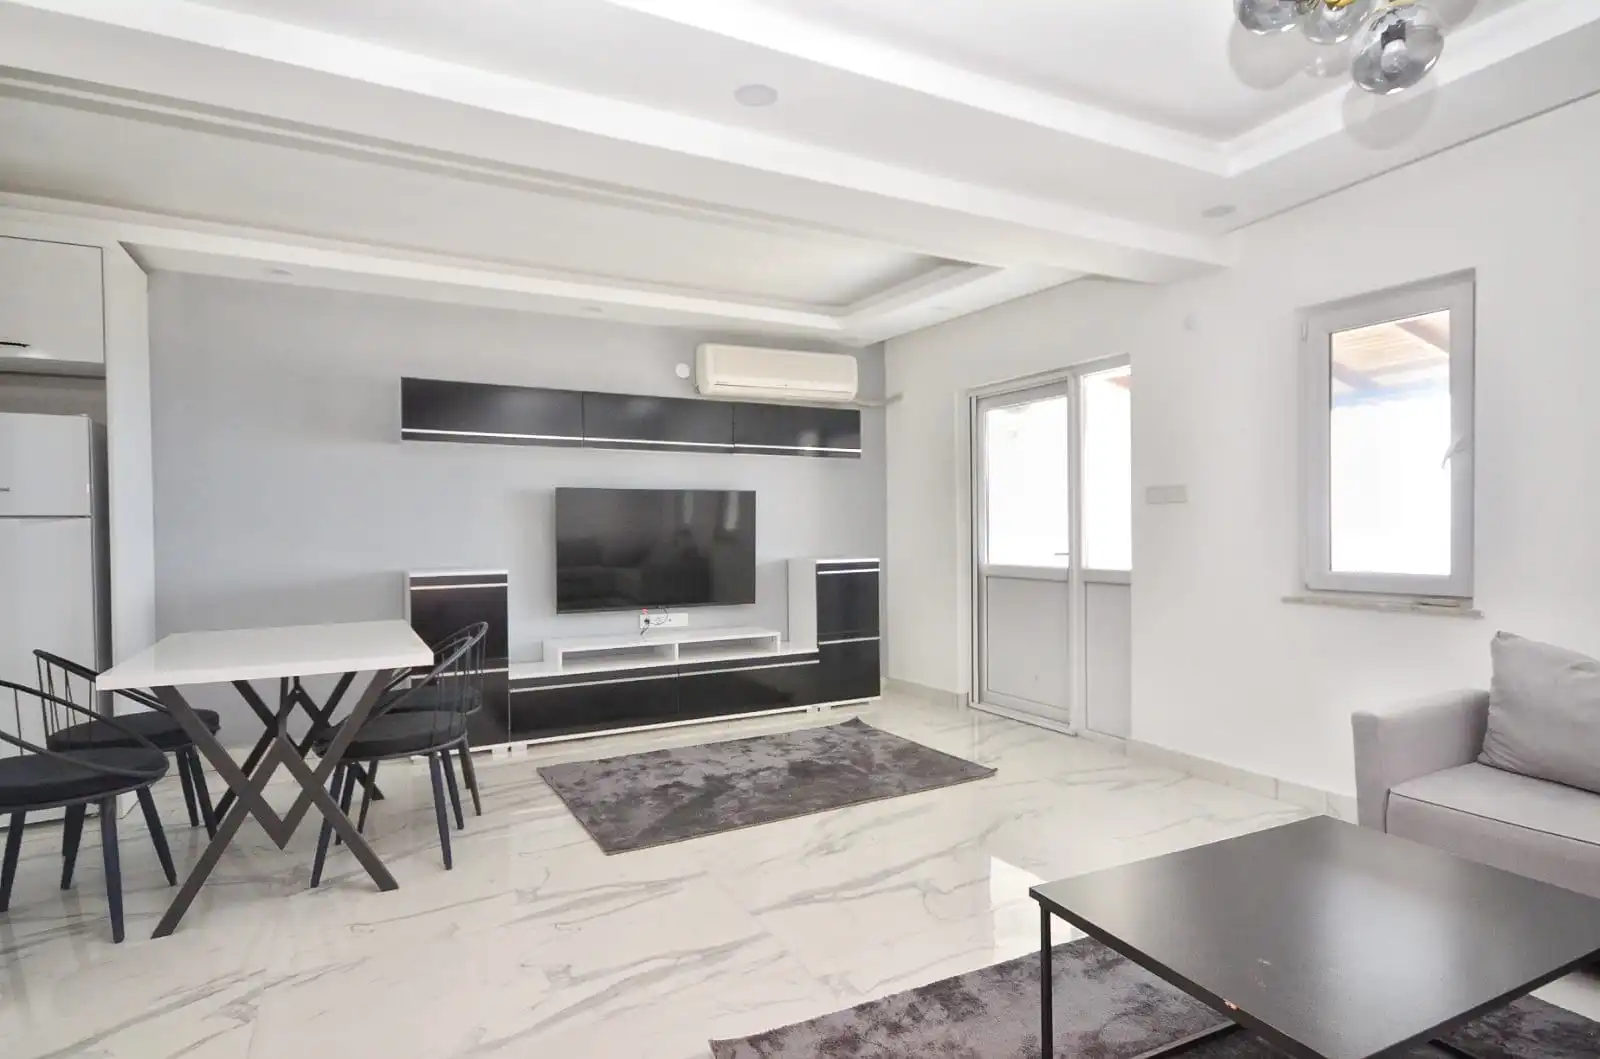 NEWLY RENOVATED VILLA IN DEMIRTAŞ JUST 600M. FROM THE BEACH WITH VIEW